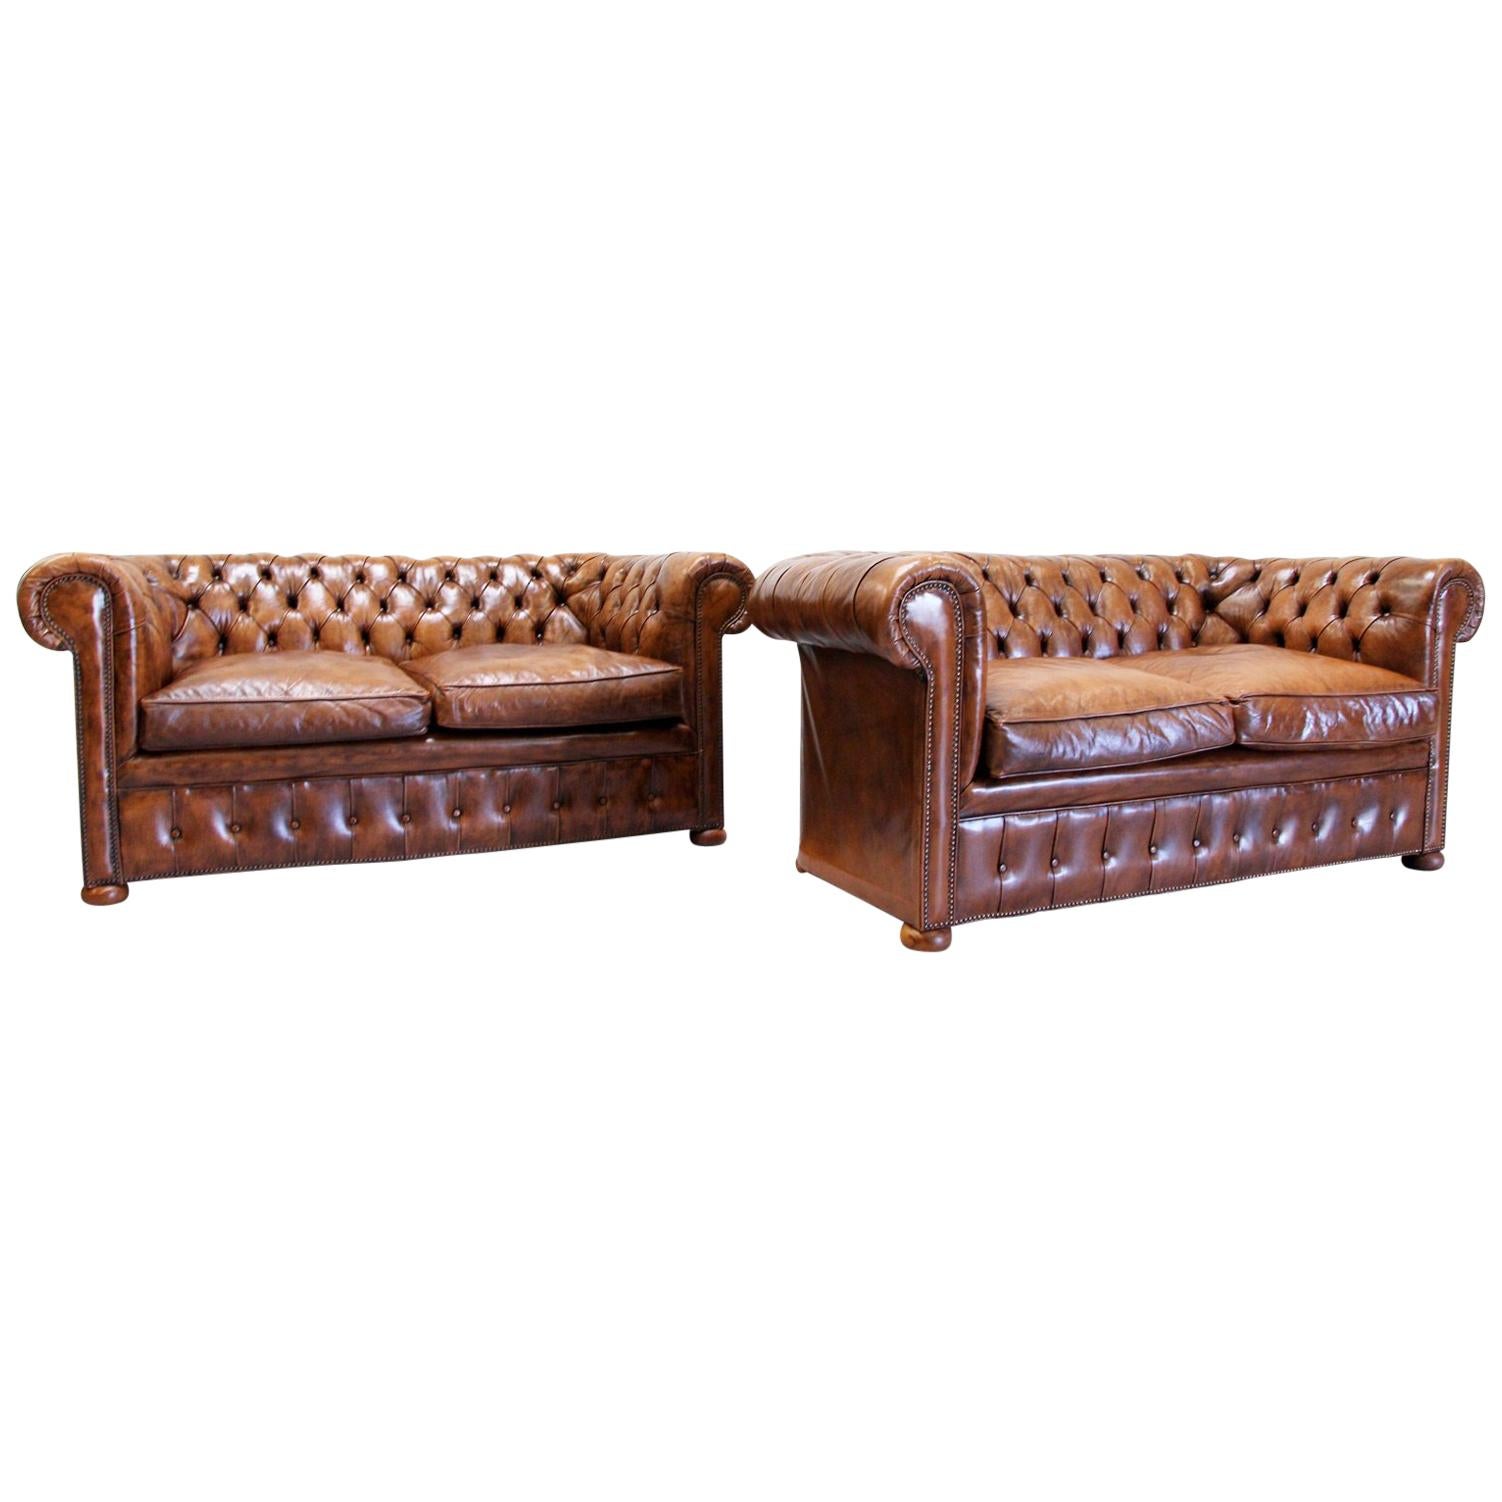 2 Chesterfield Sofa Leather Antique Vintage Couch English Chippendal For Sale